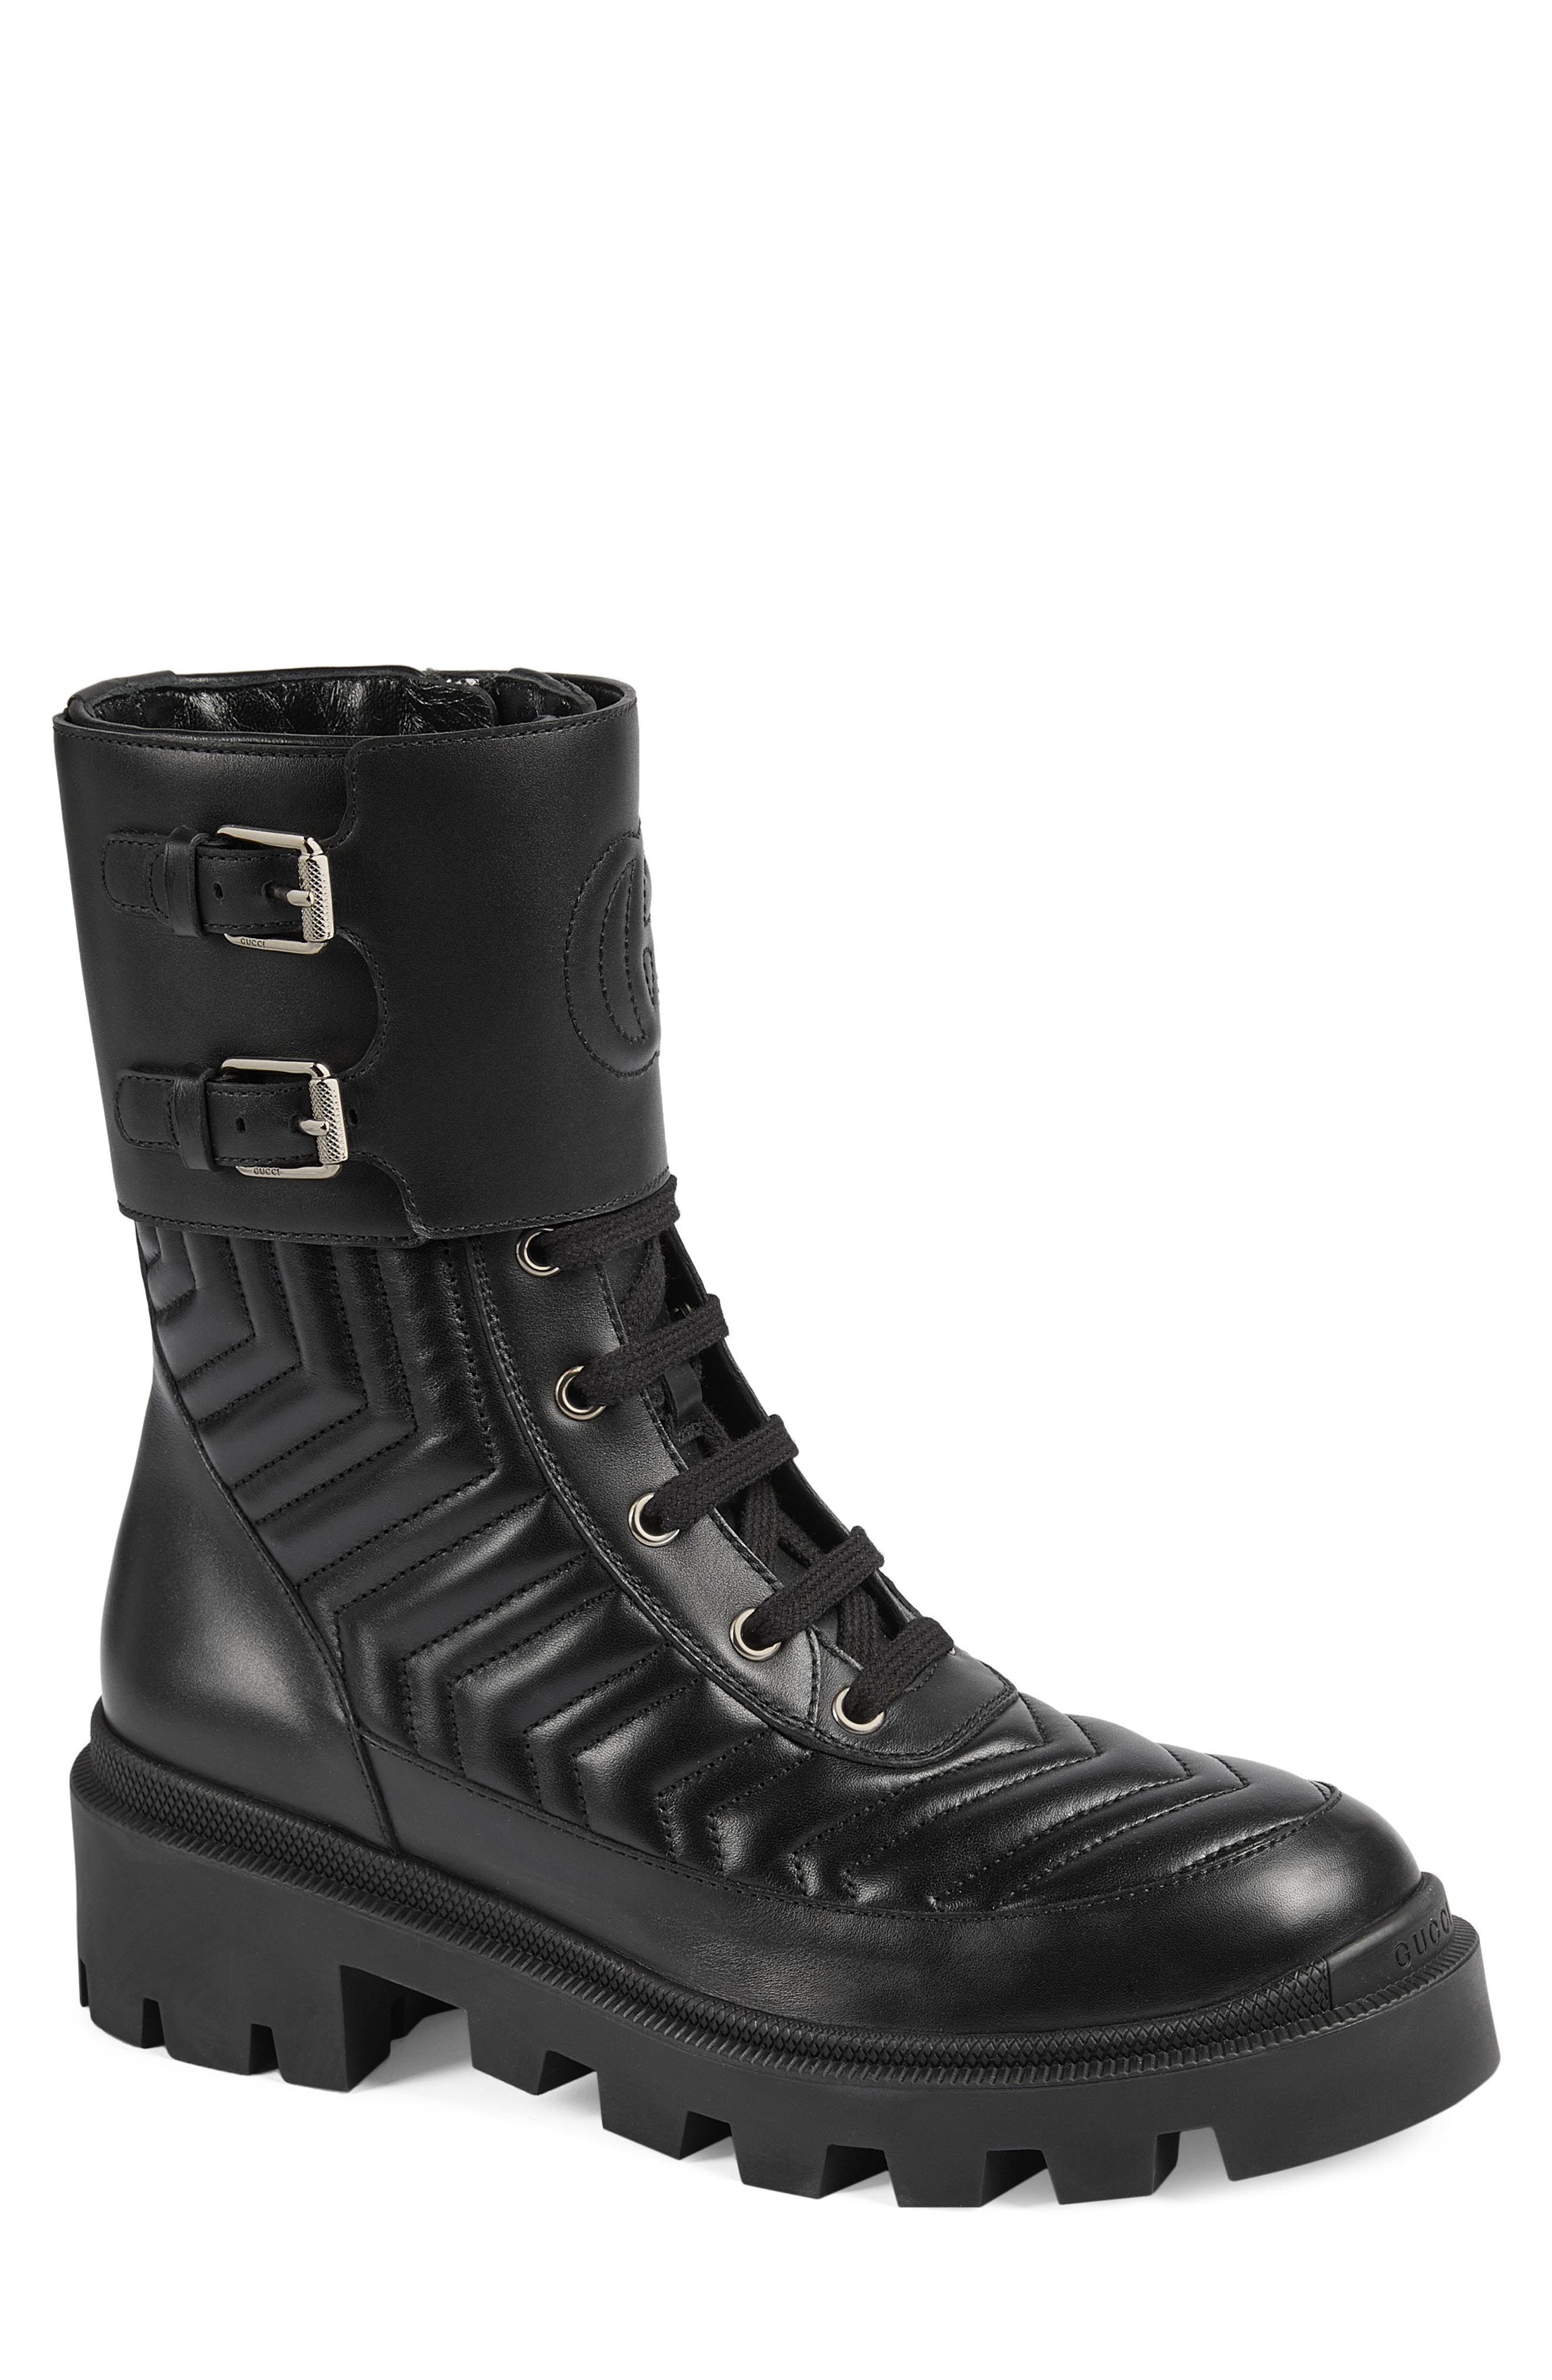 Women's Gucci Boots | Nordstrom